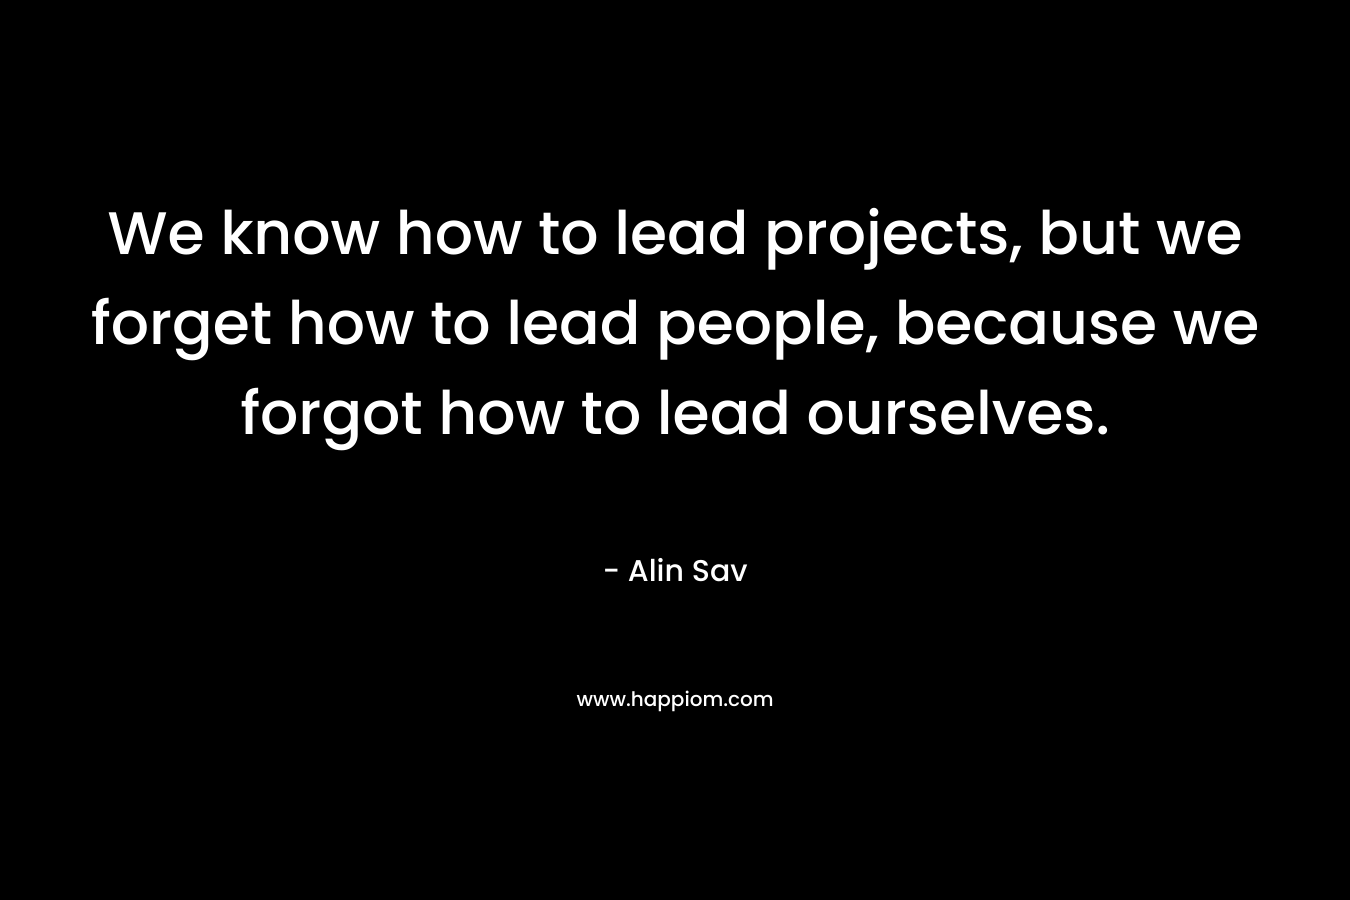 We know how to lead projects, but we forget how to lead people, because we forgot how to lead ourselves.